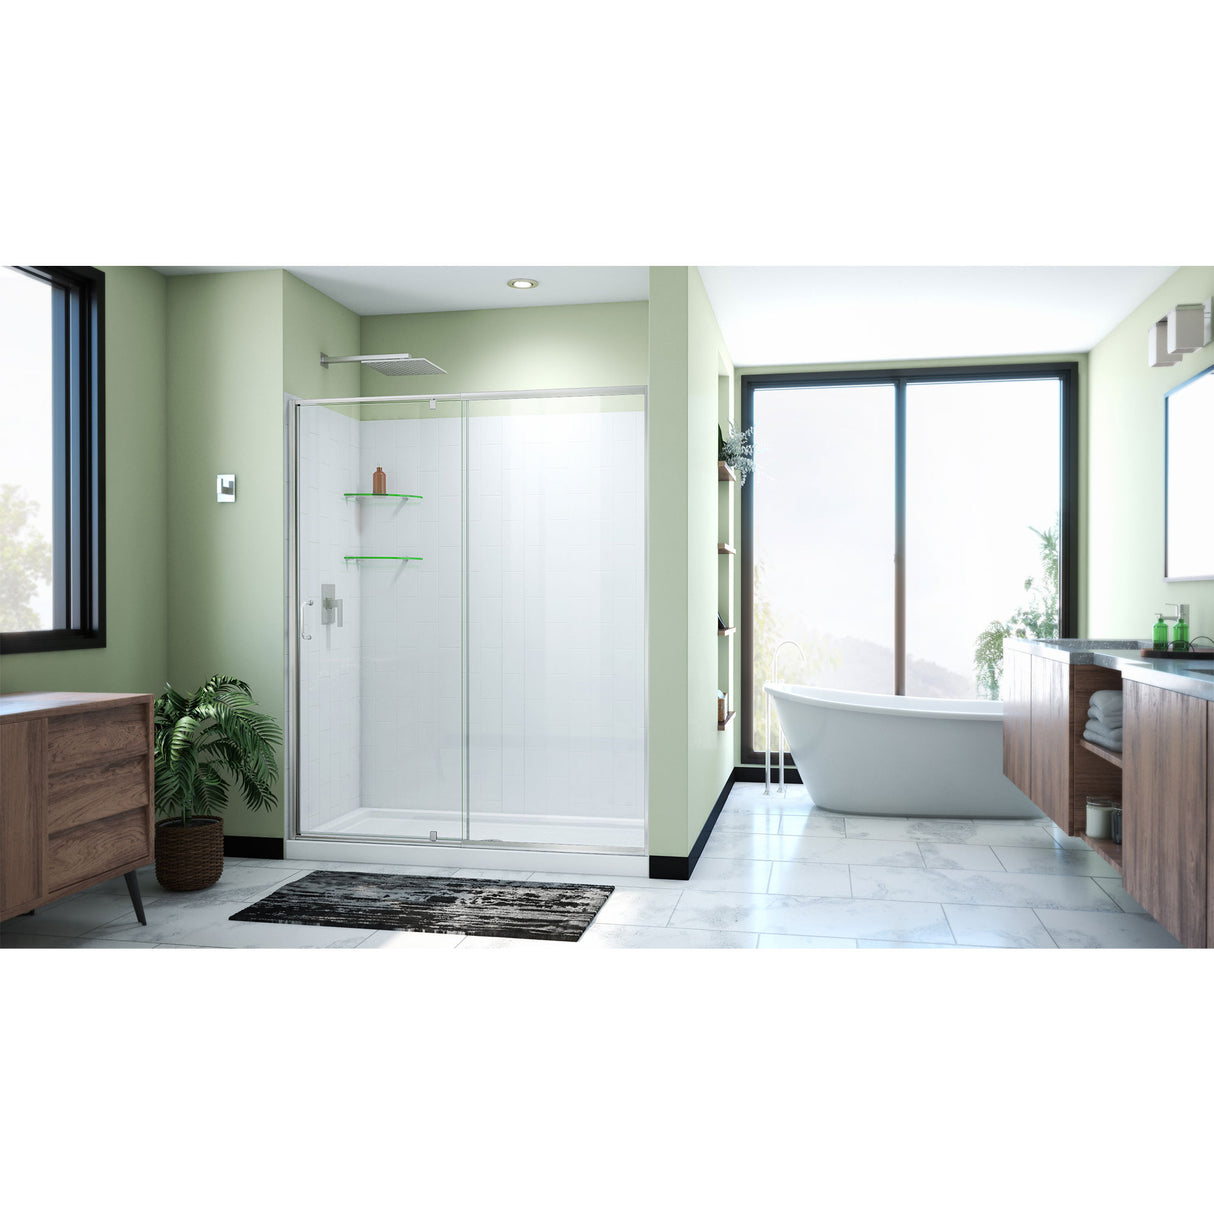 DreamLine Flex 36 in. D x 60 in. W x 78 3/4 in. H Pivot Shower Door, Base, and White Wall Kit in Brushed Nickel